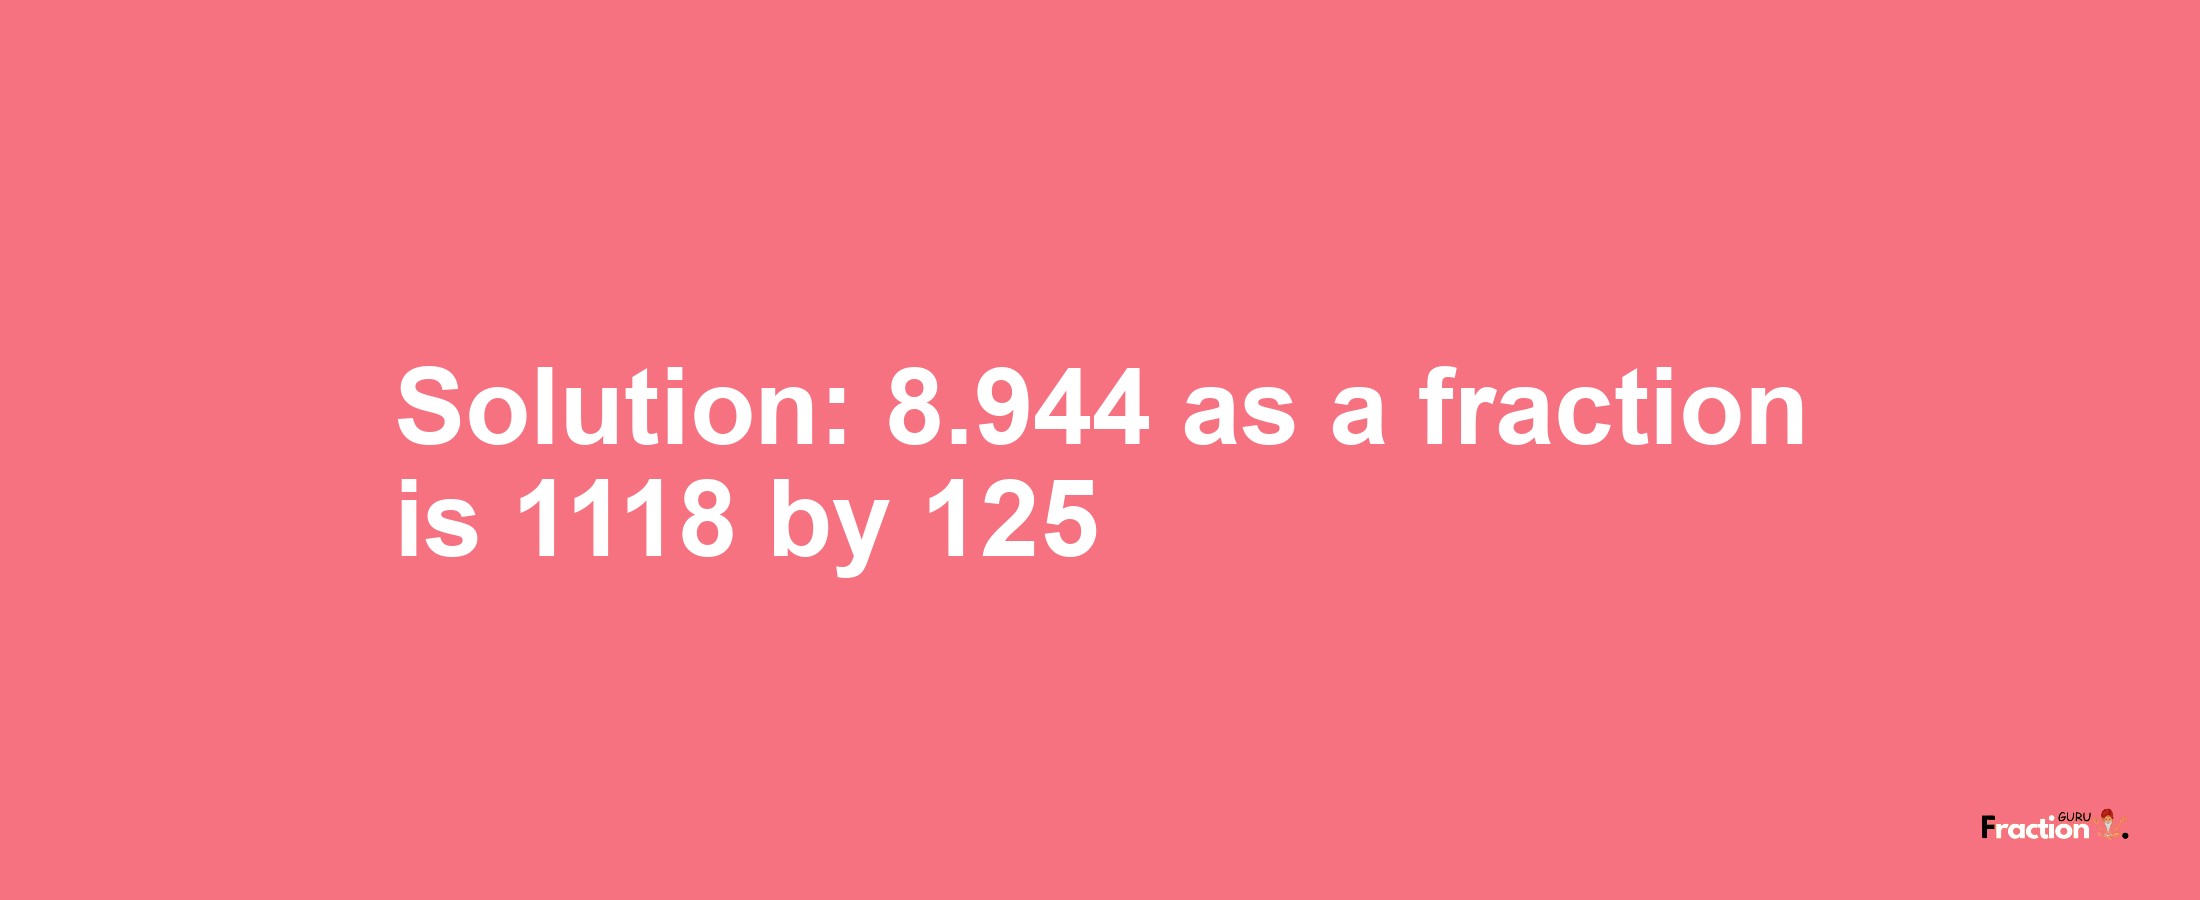 Solution:8.944 as a fraction is 1118/125